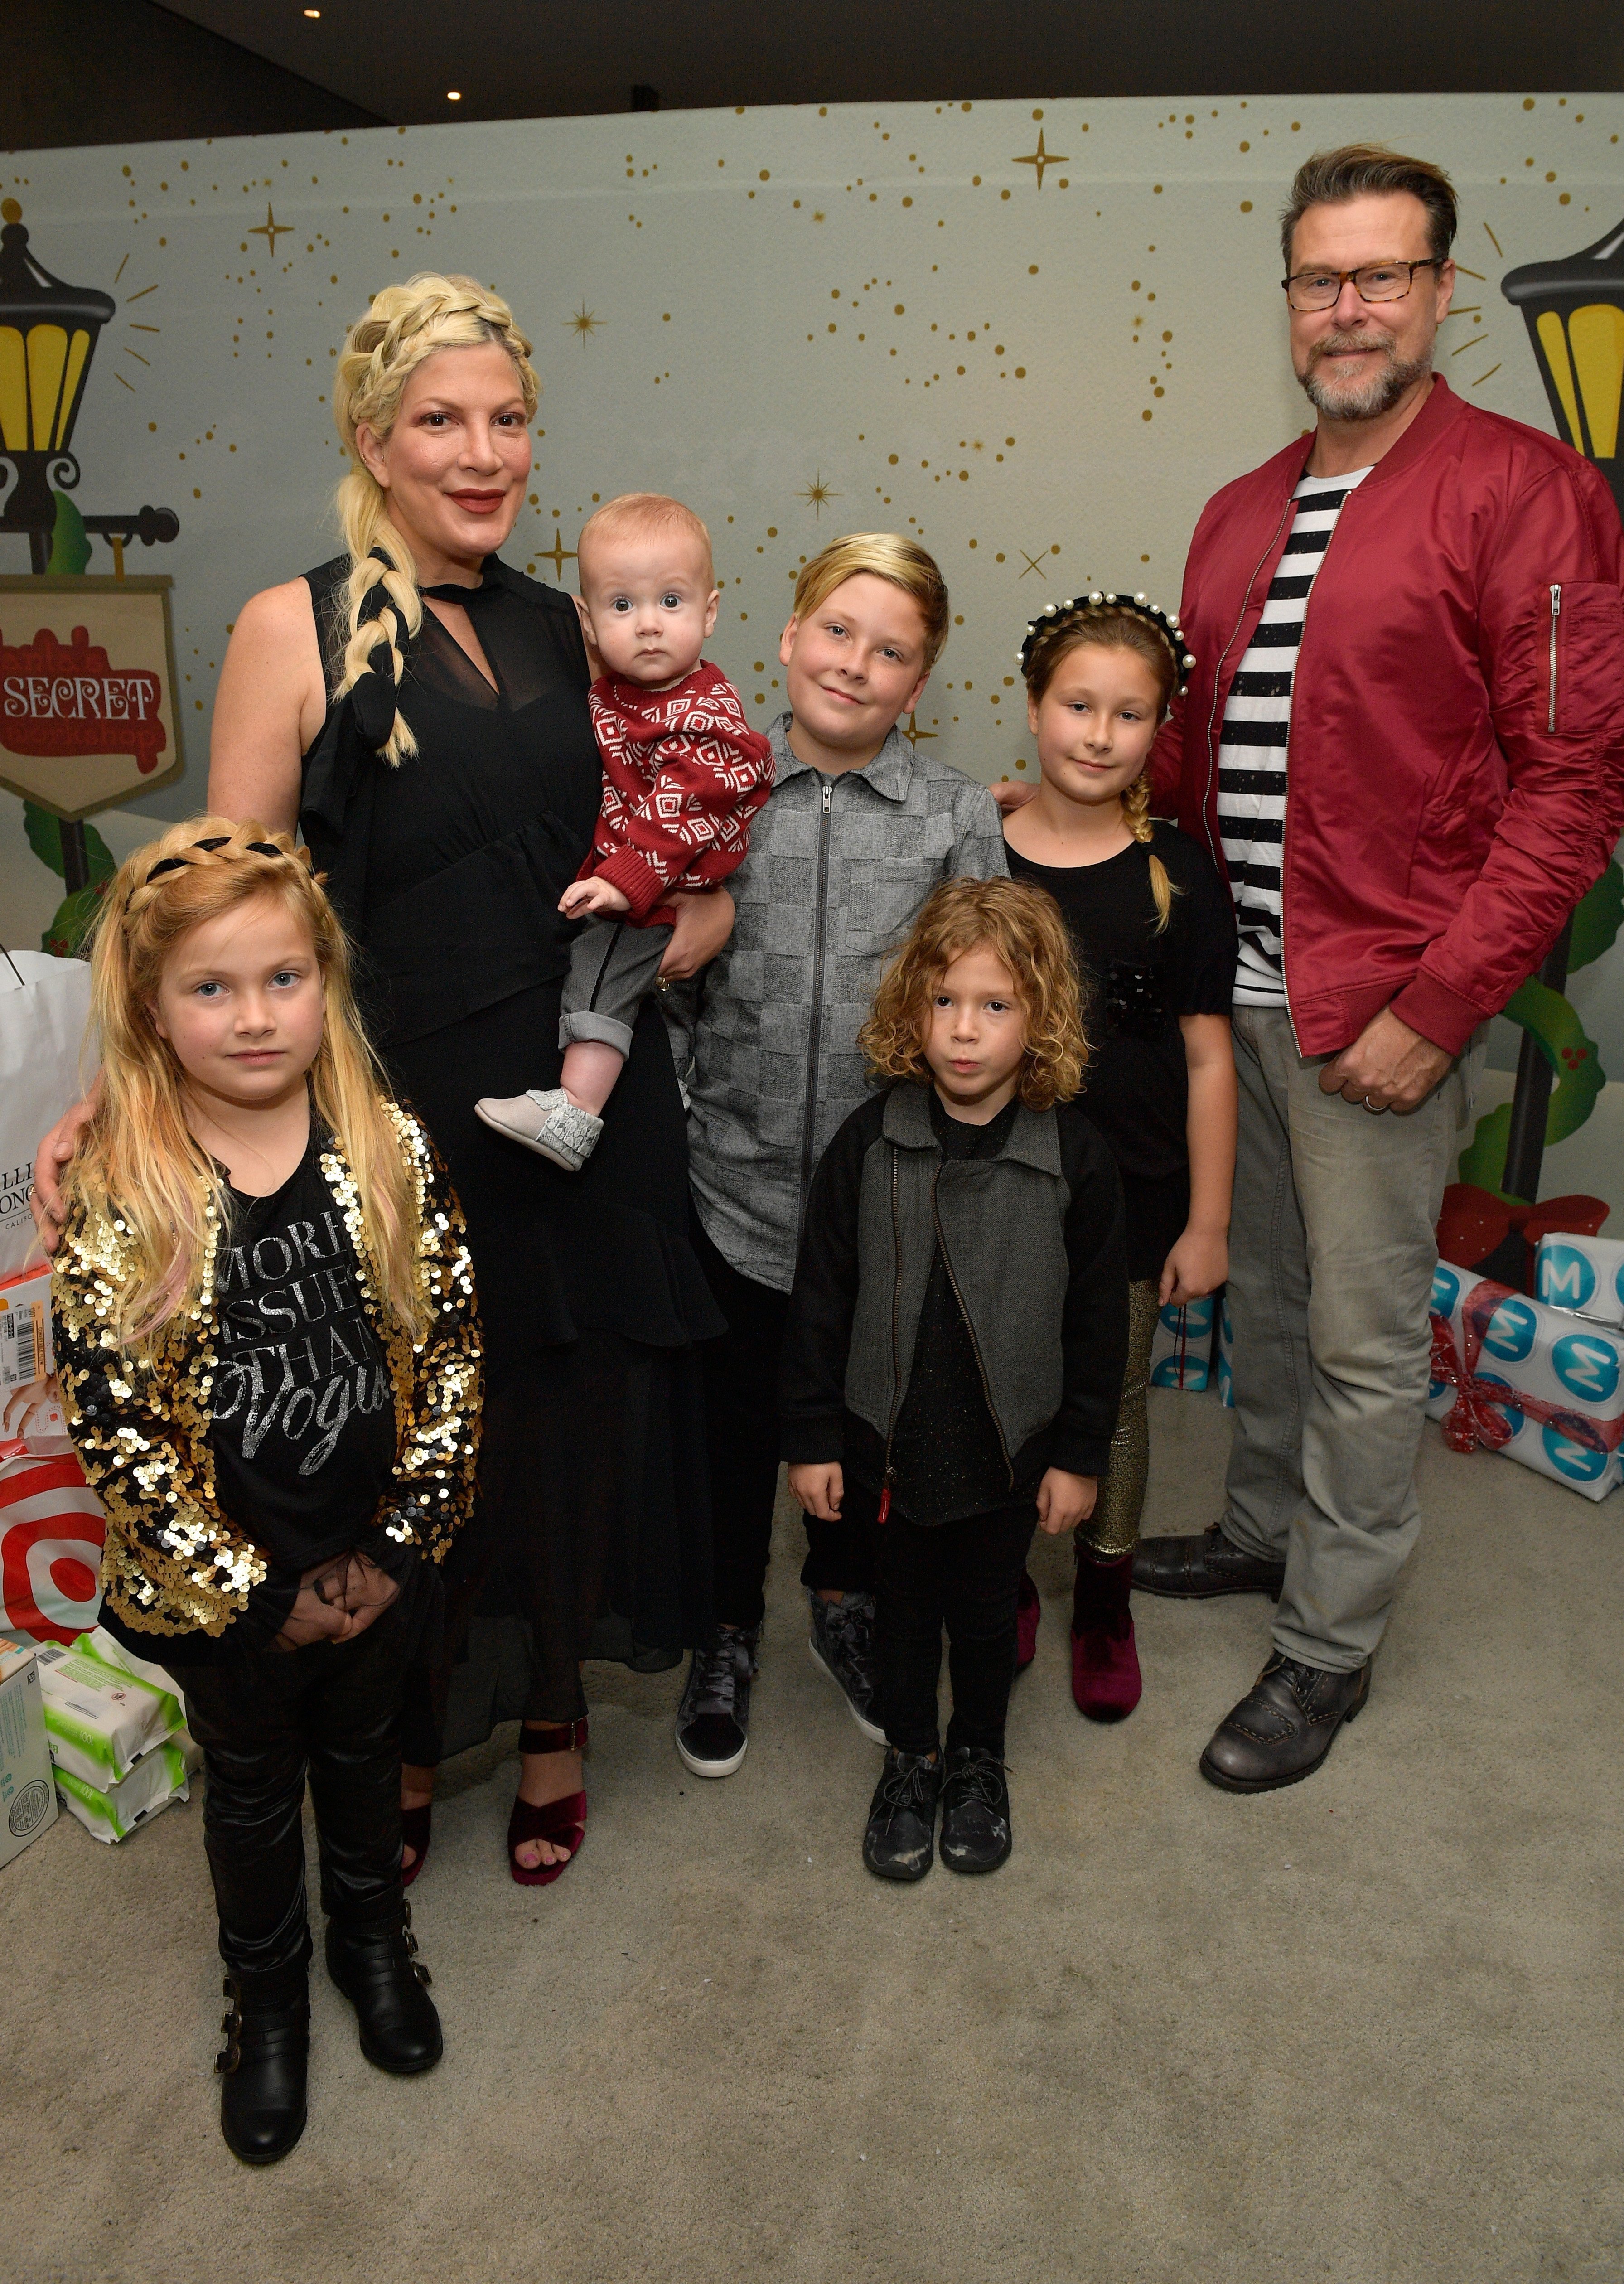 Tori Spelling, Dean McDermott, and their children at the 7th Annual Santa's Secret Workshop benefiting LA Family Housing. | Source: Getty Images